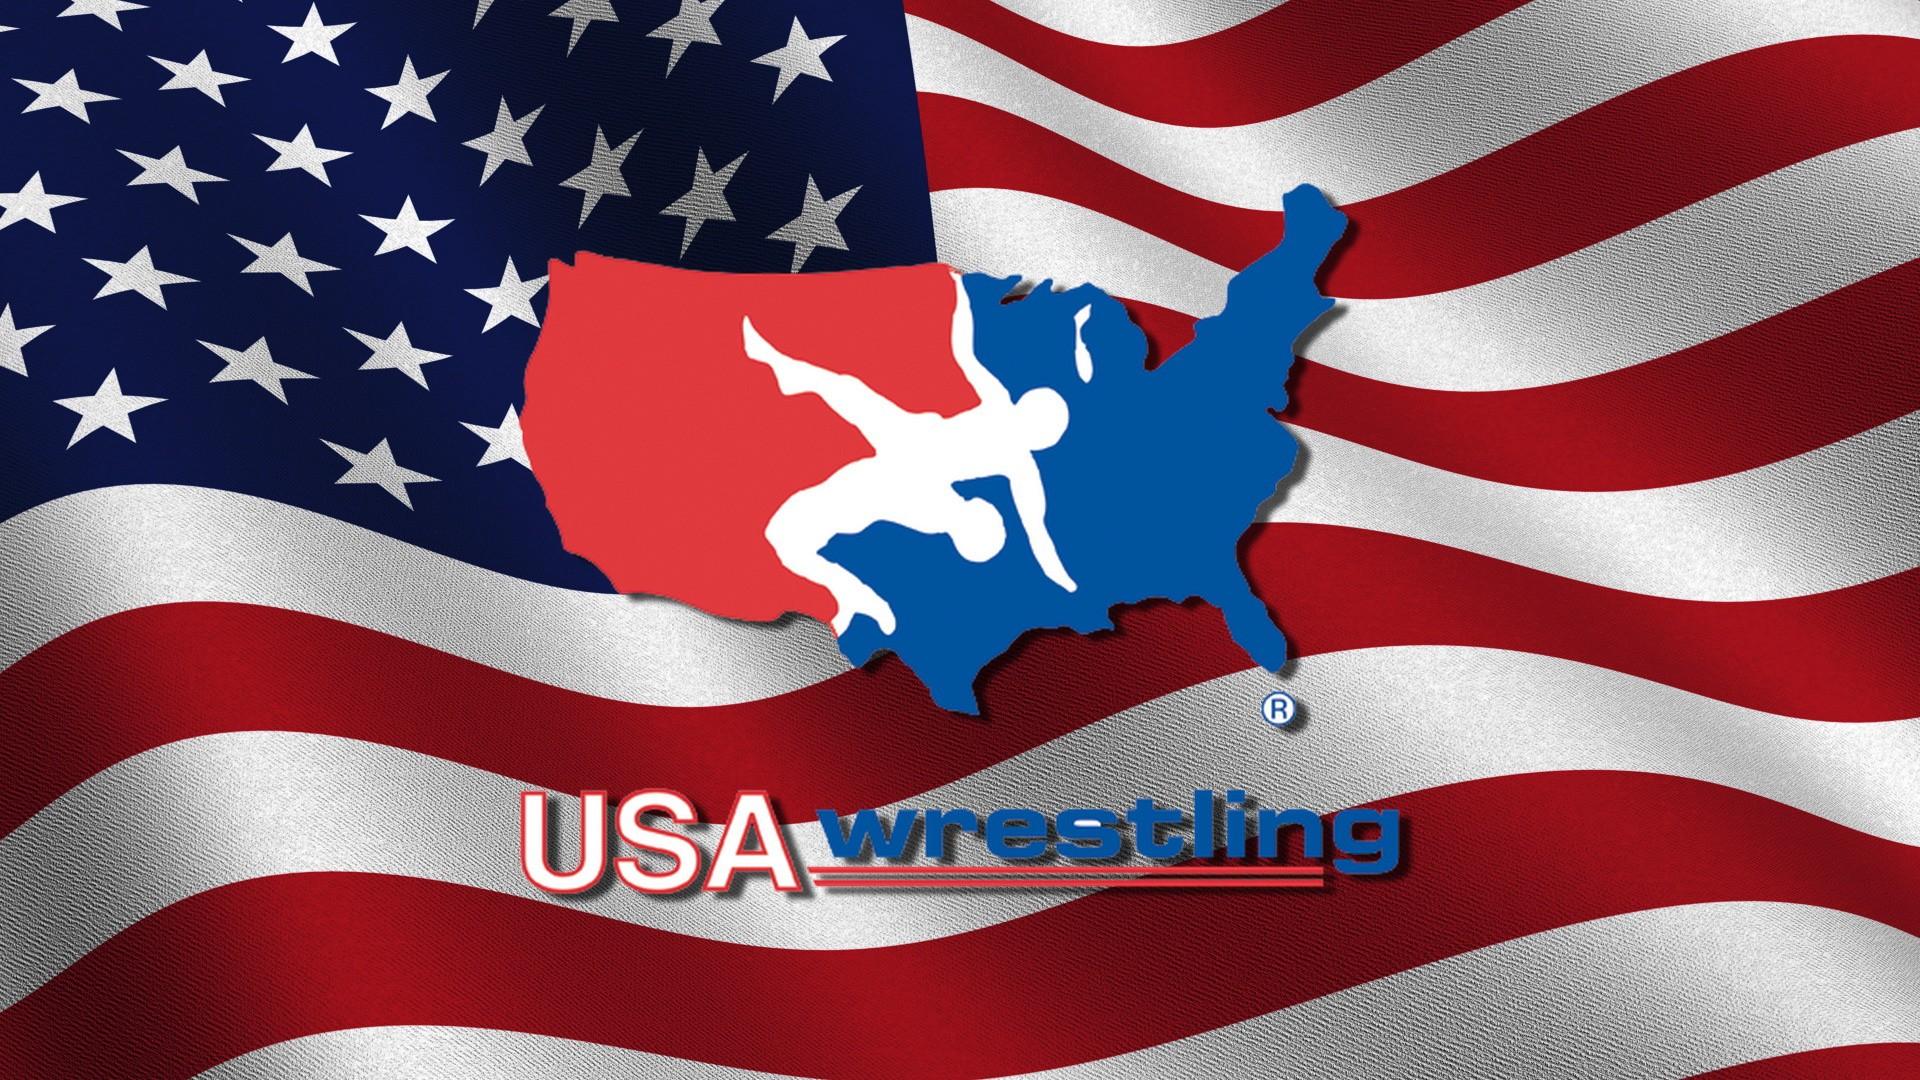 USA Wrestling Wallpapers